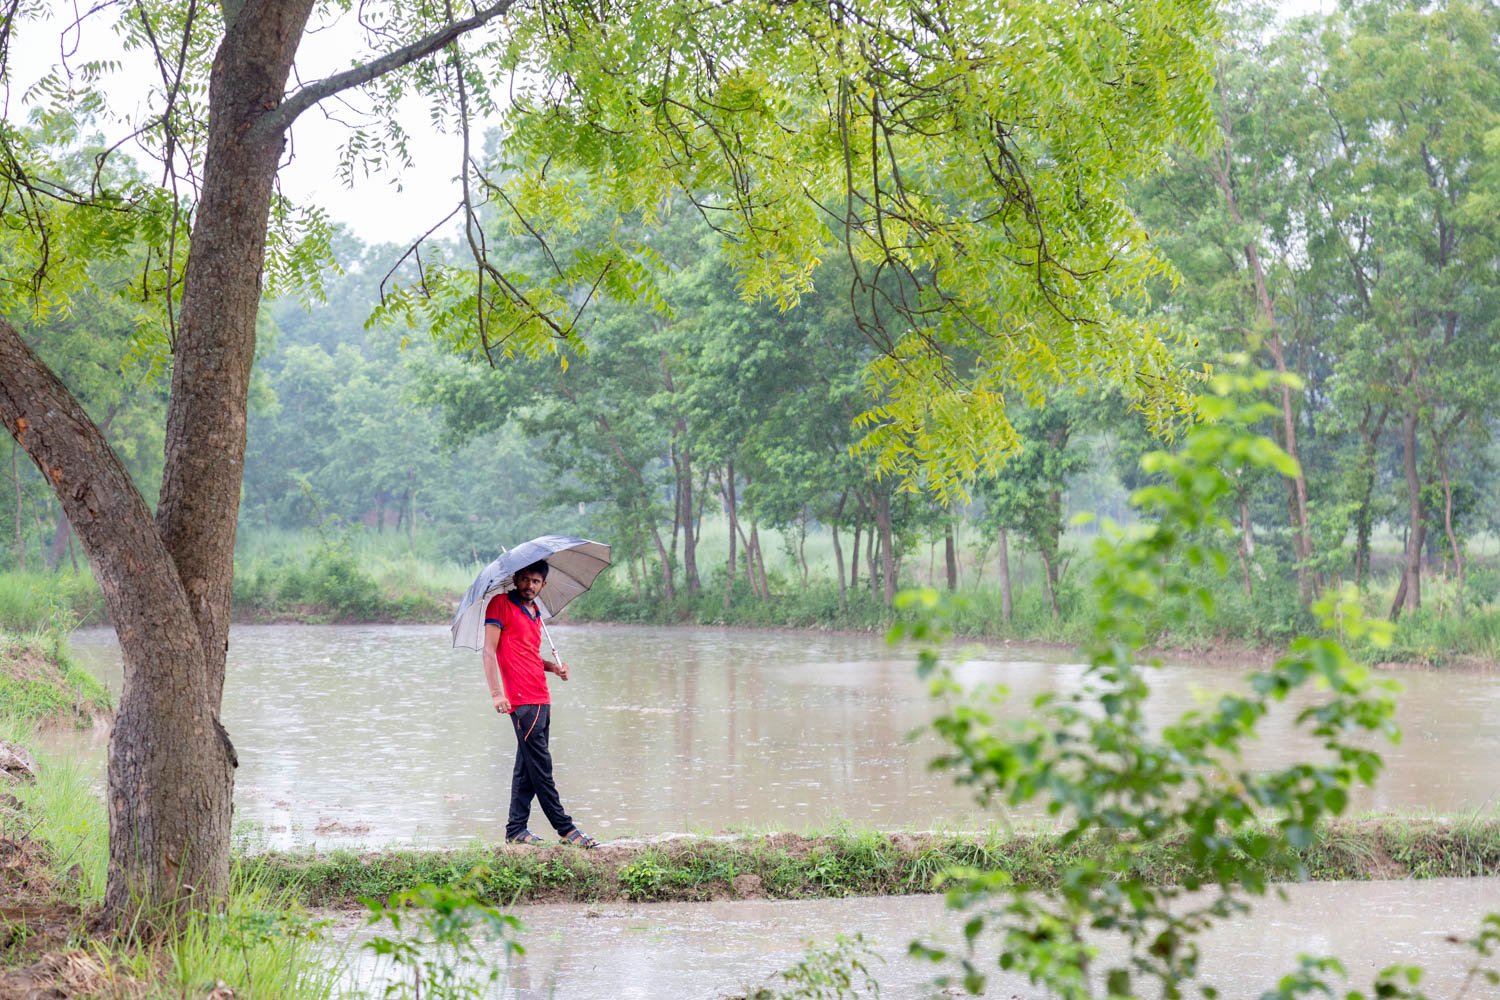  Indrajit Mandal, 22, holds an umbrella in the village of Nagrain 9, in the Ghodhas District outside of Janakpur, Nepal on July 1, 2022.  Mandal recently applied to work as an electrician in Qatar. 